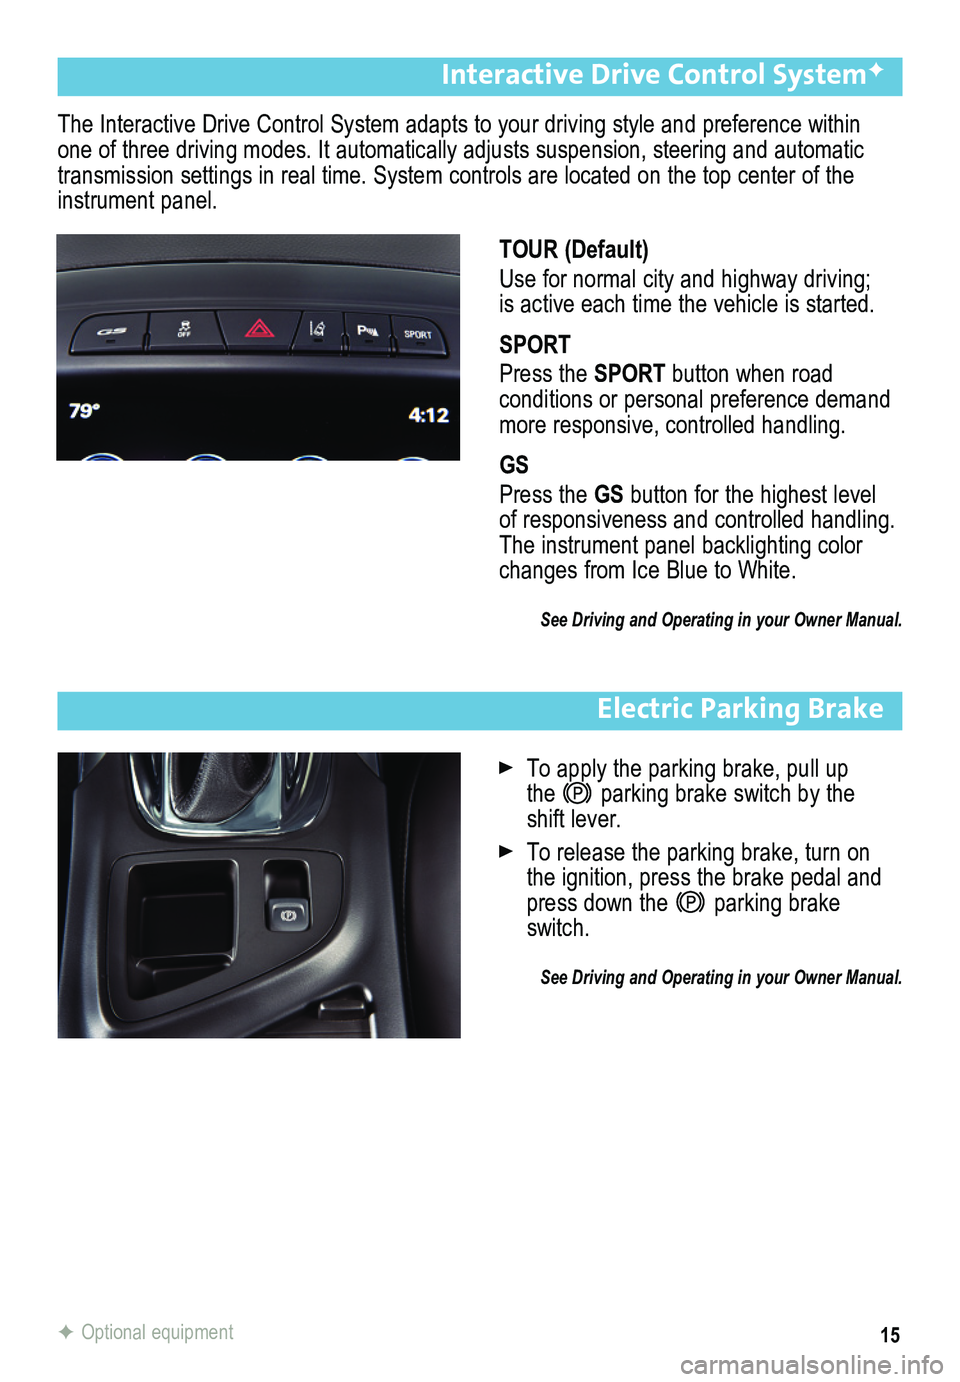 BUICK REGAL 2014  Get To Know Guide 15
Electric Parking Brake
 To apply the parking brake, pull up  the  parking brake switch by the  shift lever.
 To release the parking brake, turn on the ignition, press the brake pedal and press down